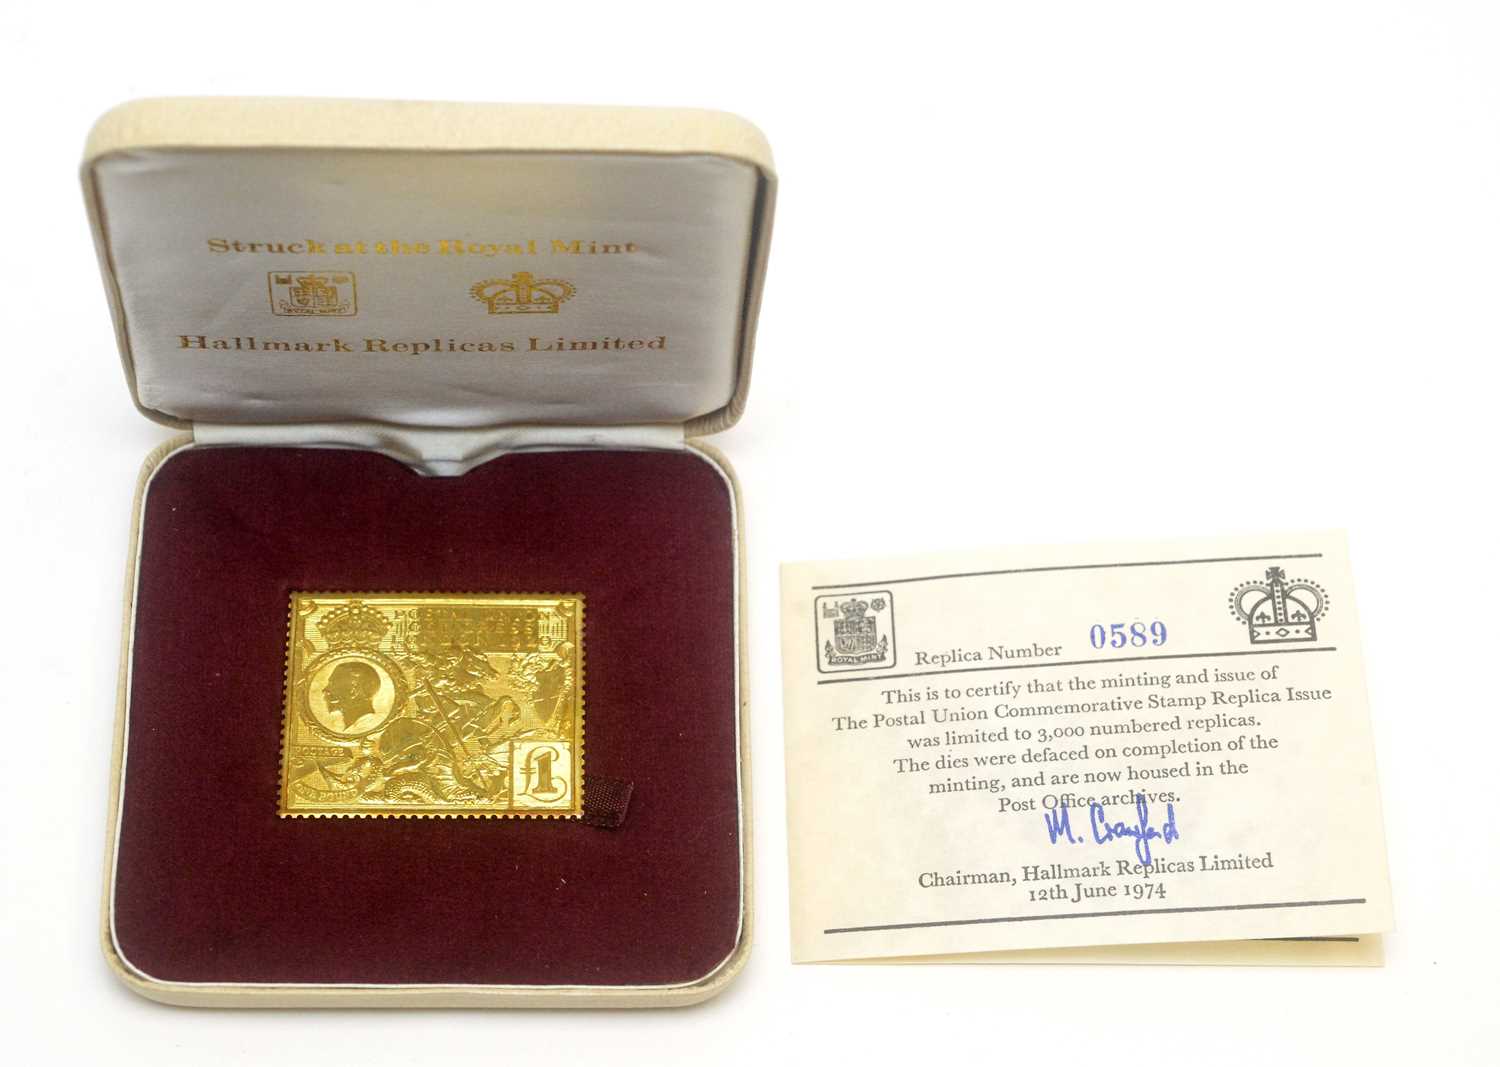 Lot 952 - Royal Mint for Hallmarks Replica Limited Postal Union Congress replica £1 stamp